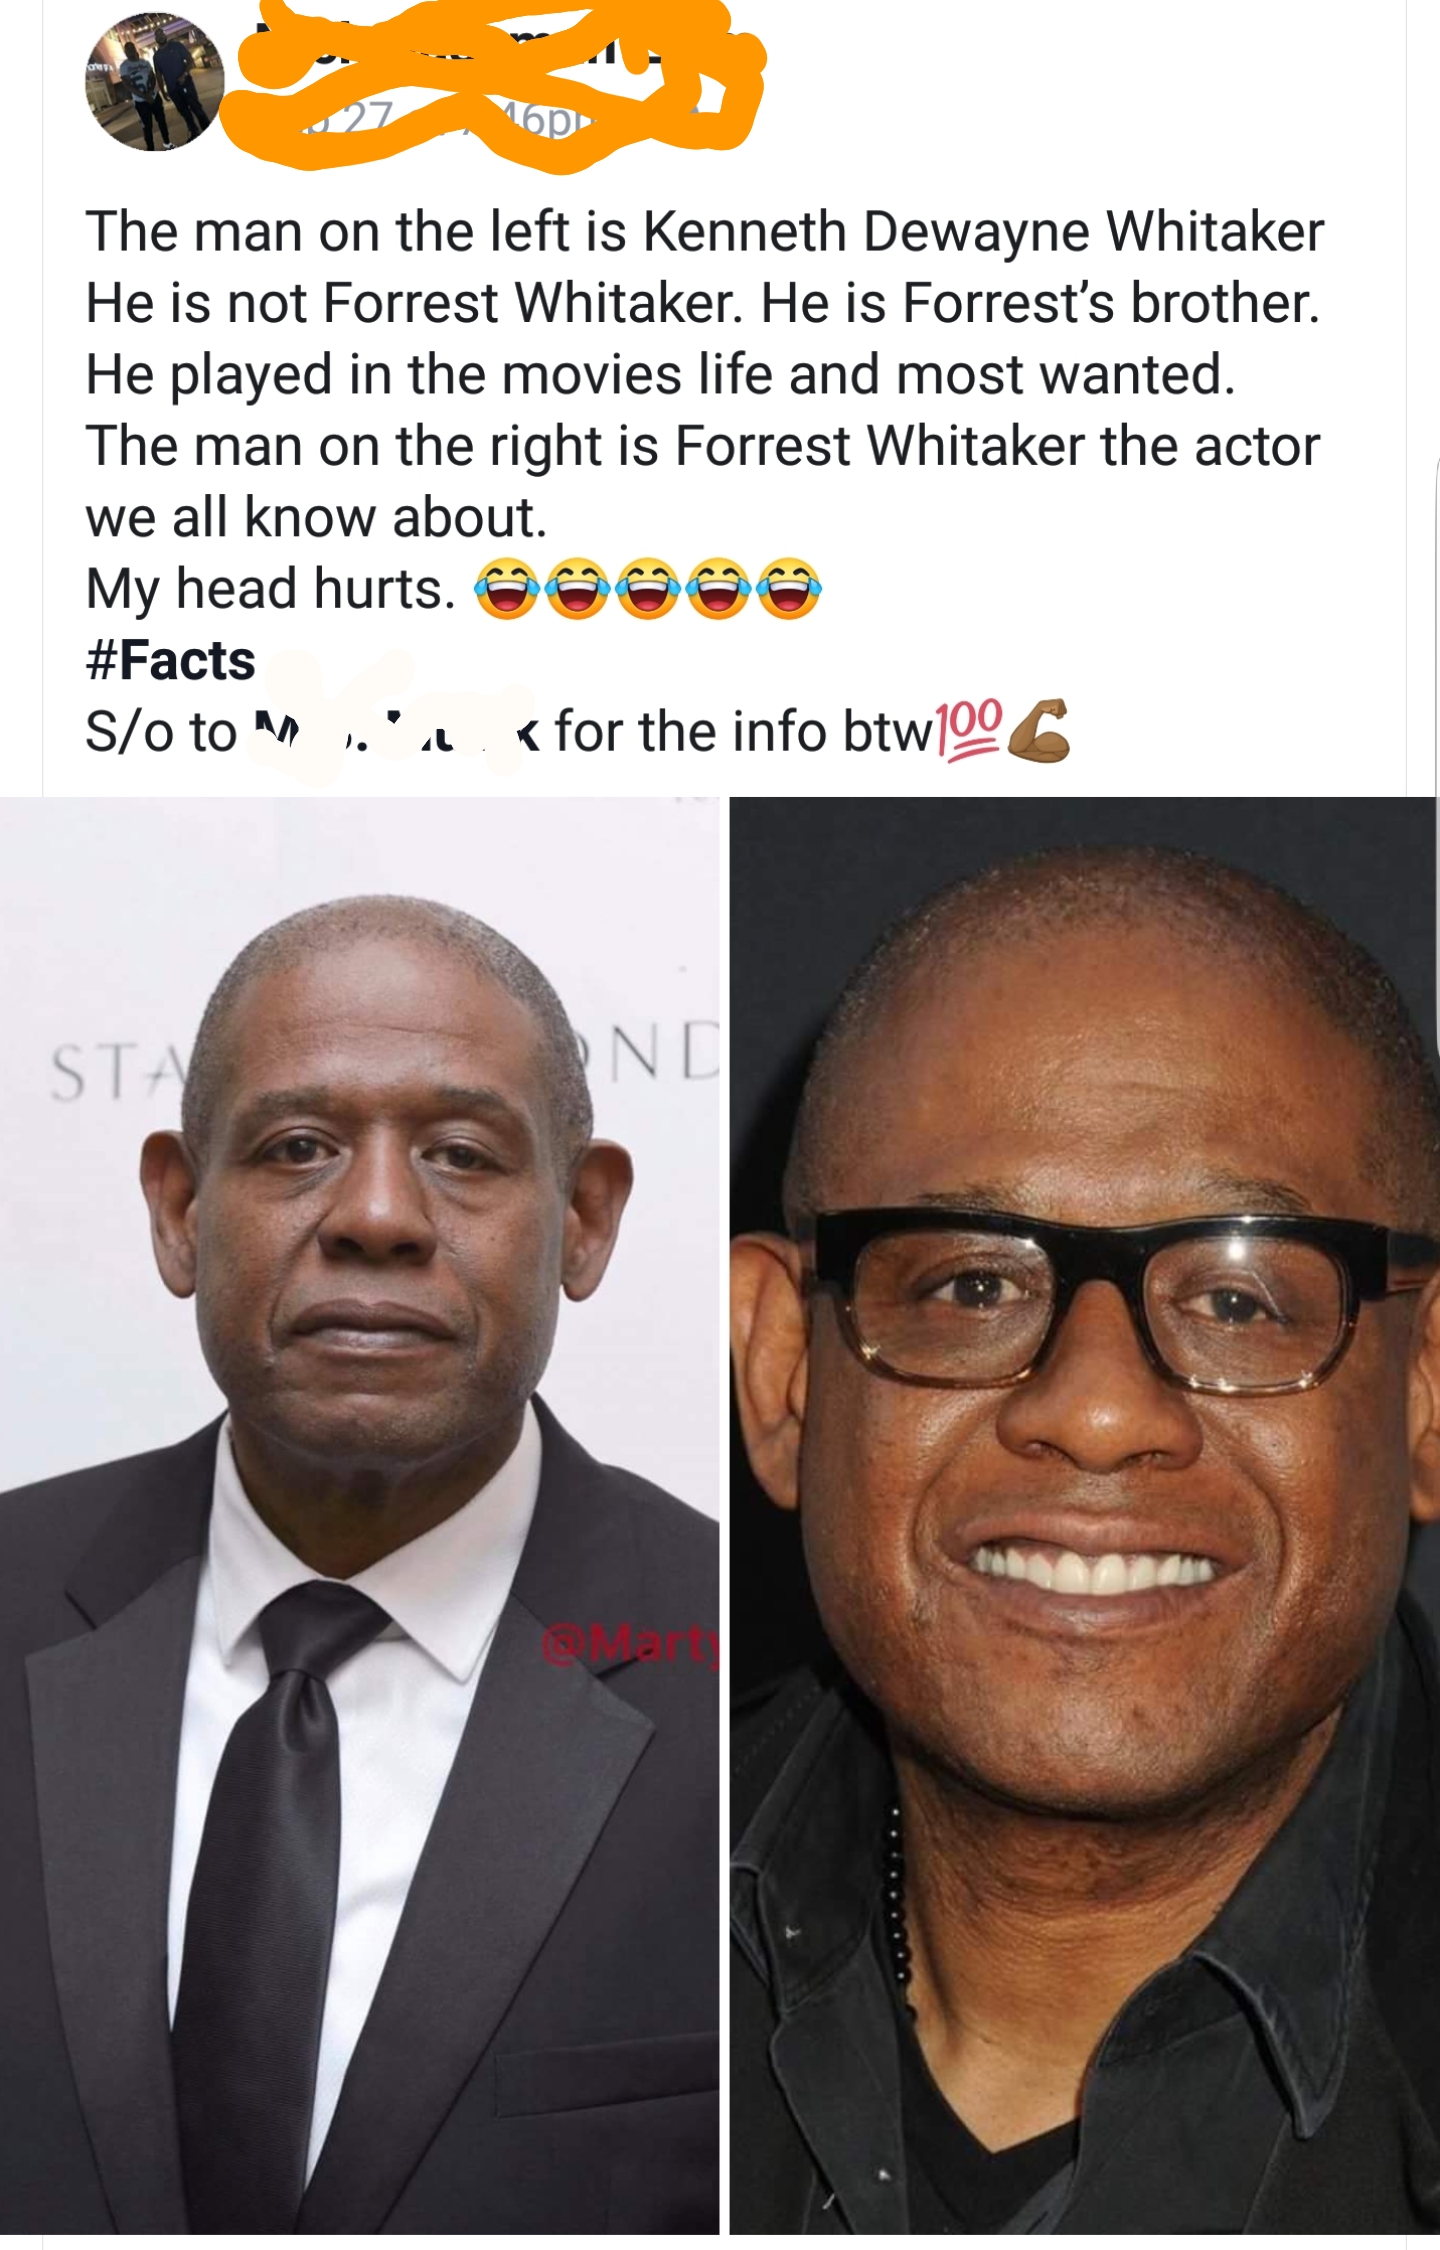 black twitter ken whitaker actor - The man on the left is Kenneth Dewayne Whitaker He is not Forrest Whitaker. He is Forrest's brother. He played in the movies life and most wanted. The man on the right is Forrest Whitaker the actor we all know about. My 